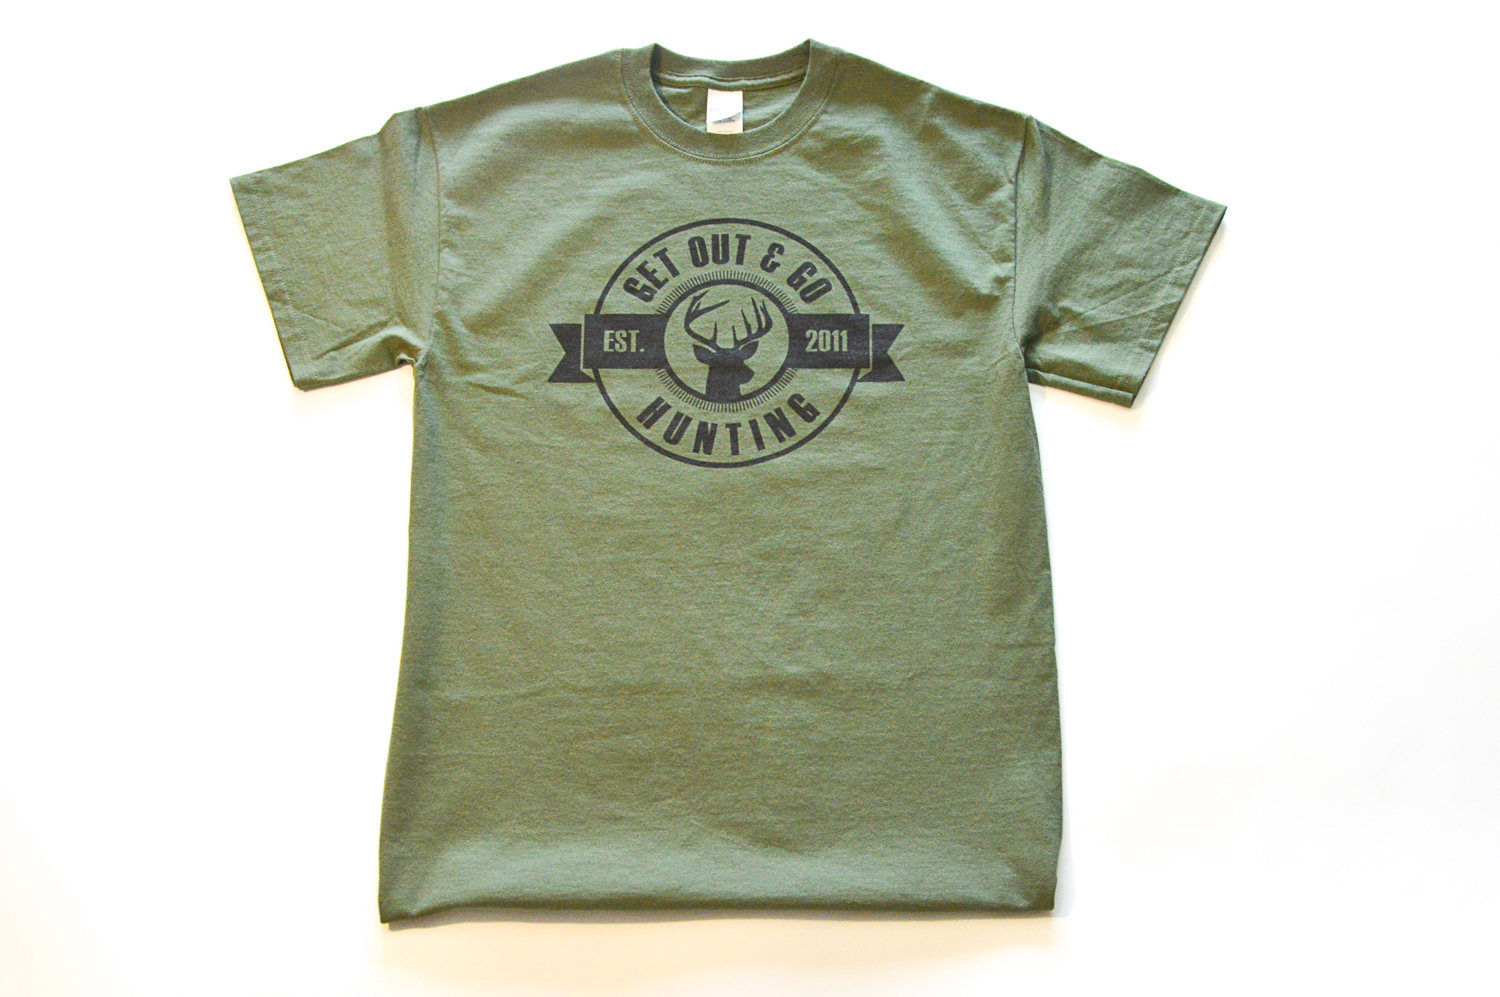 Classic Deer Logo T-Shirt | Get Out & Go Hunting